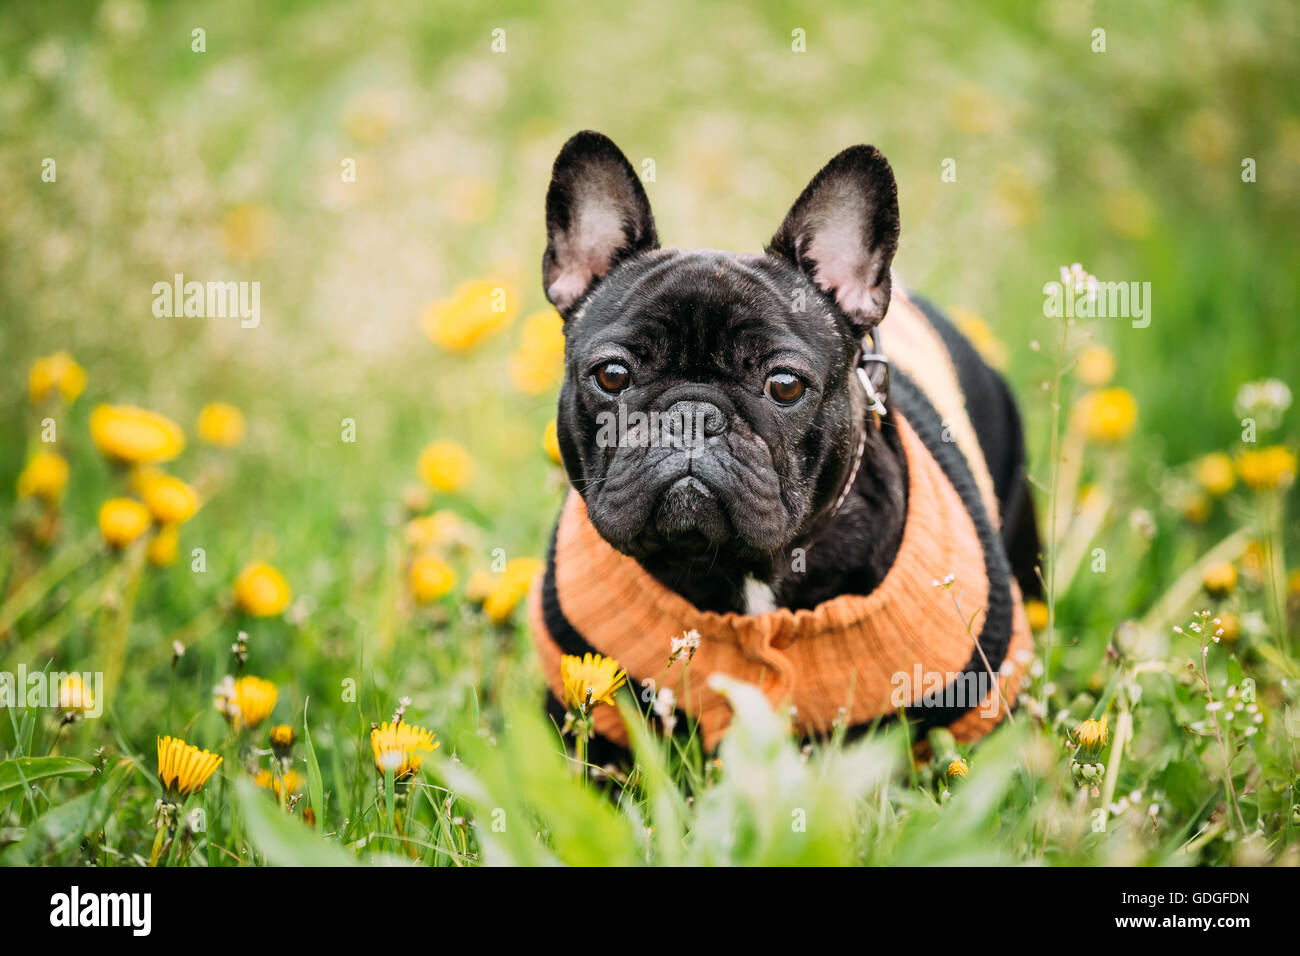 Young Black French Bulldog Dog In Green Grass, In Park Outdoor Stock Photo